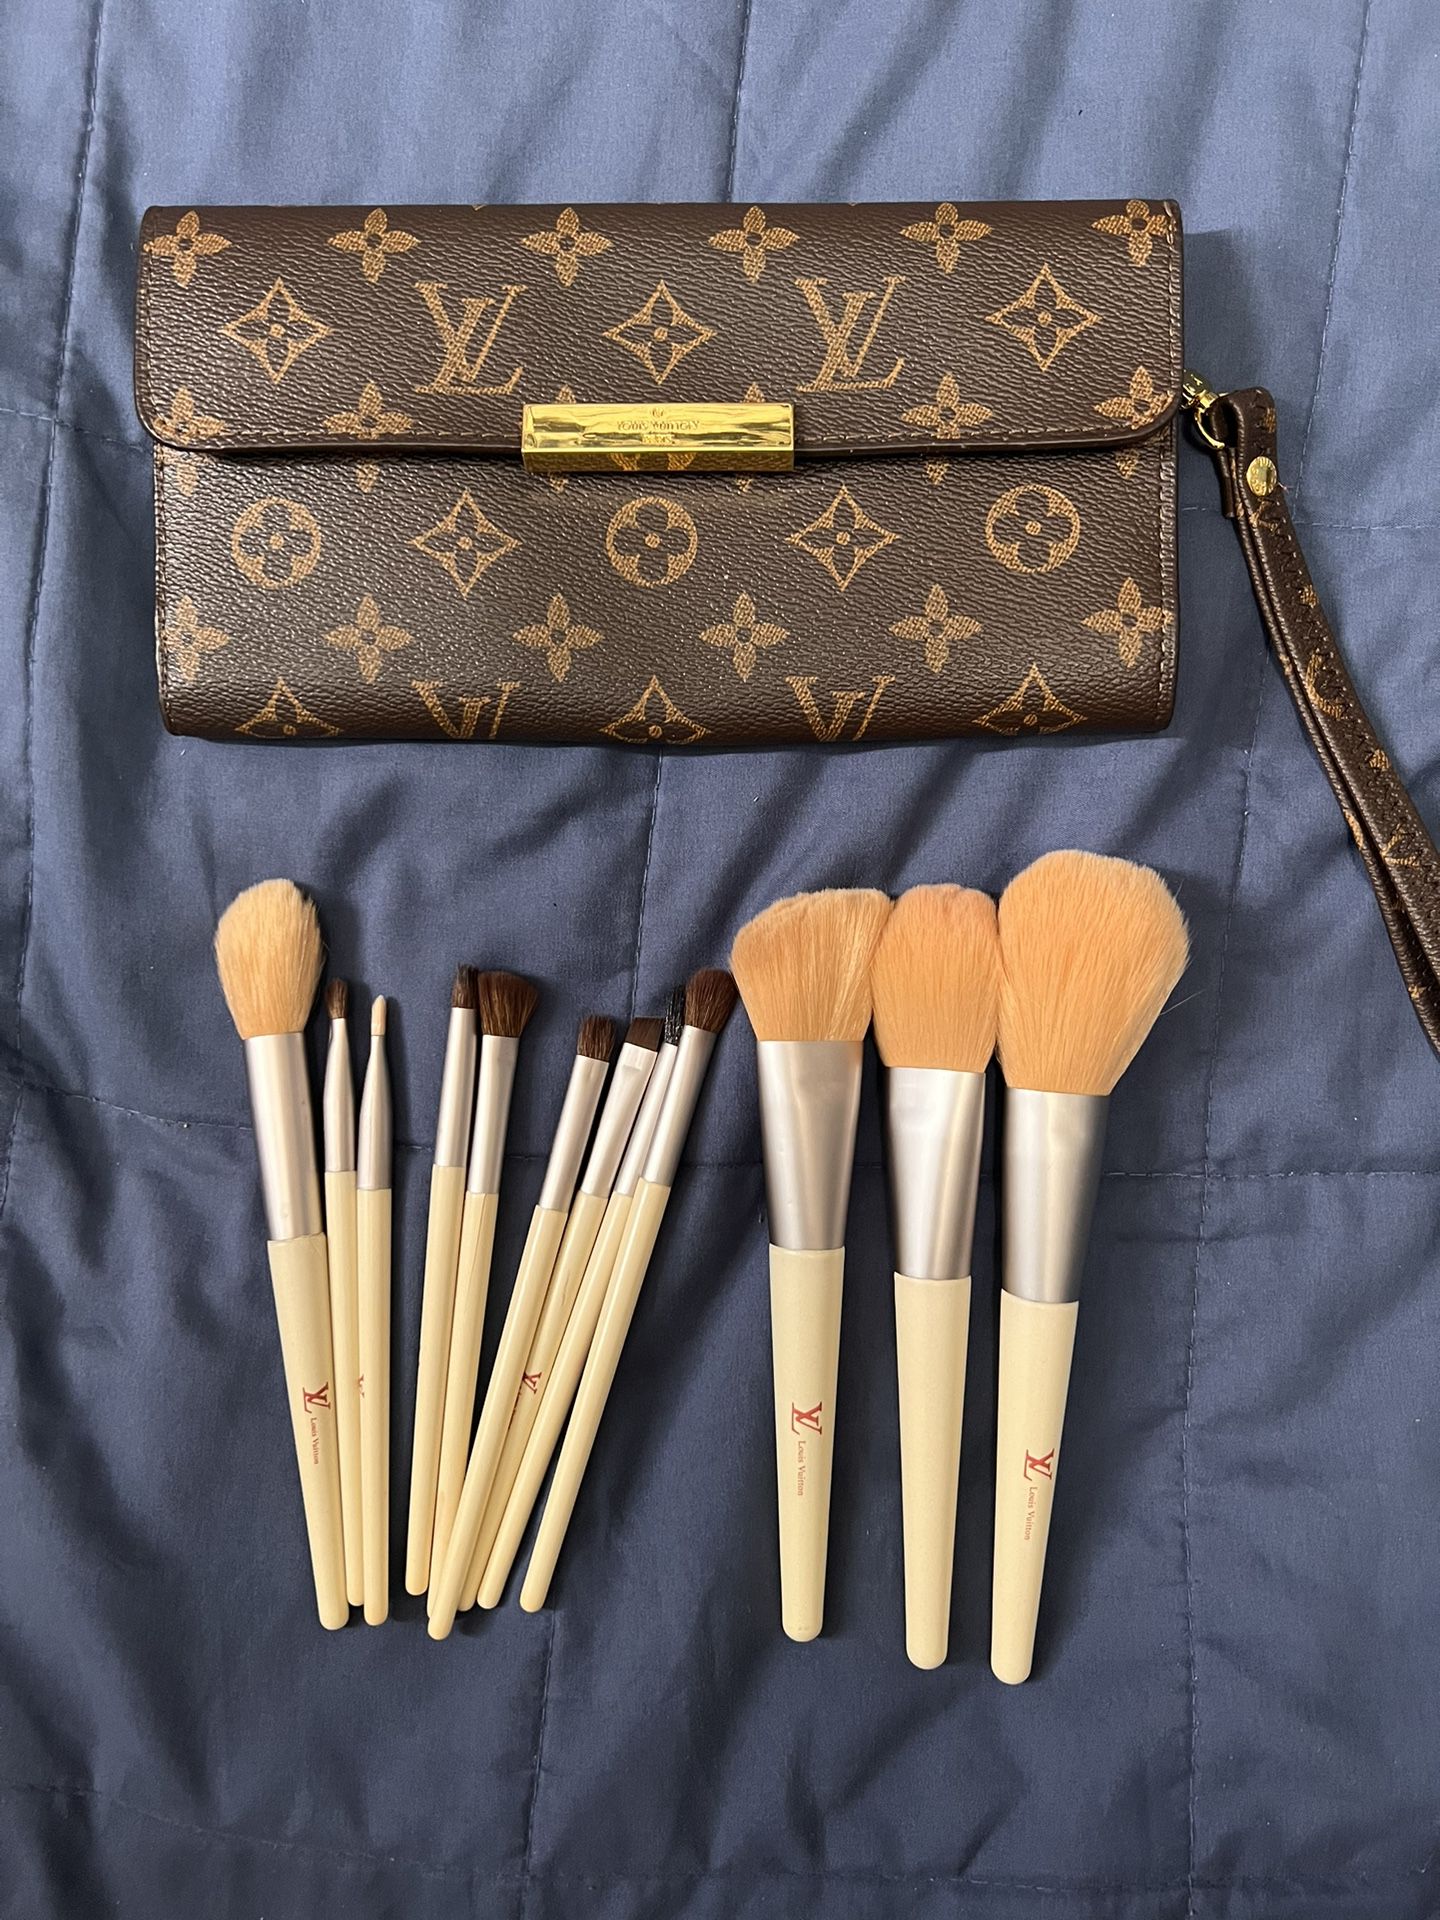 Makeup Brushes & Purse for Sale in Newman, CA - OfferUp